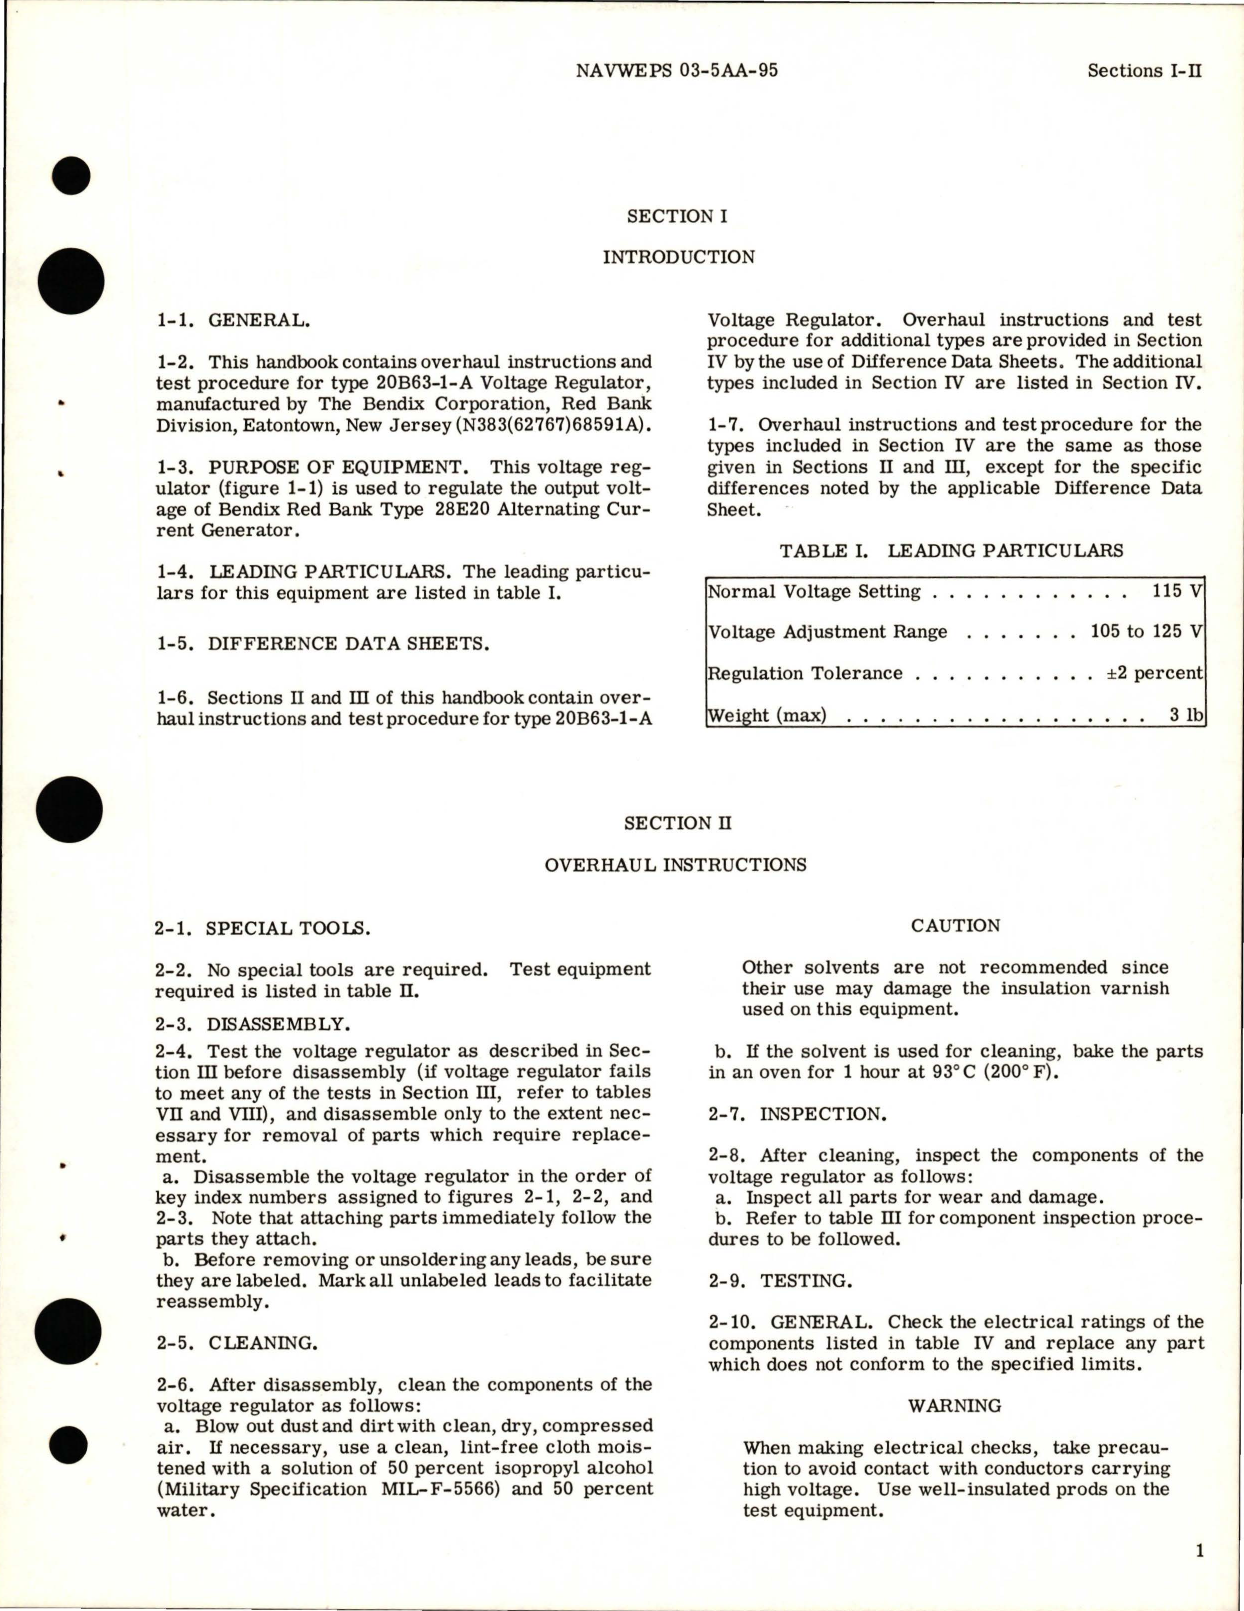 Sample page 5 from AirCorps Library document: Overhaul Instructions for Voltage Regulator - Types 20B63-1-A, 20B63-1-B, 20B63-1-C, 20B63-2-A, 20B63-2-B, 20B63-2-C, 20B72-1-A